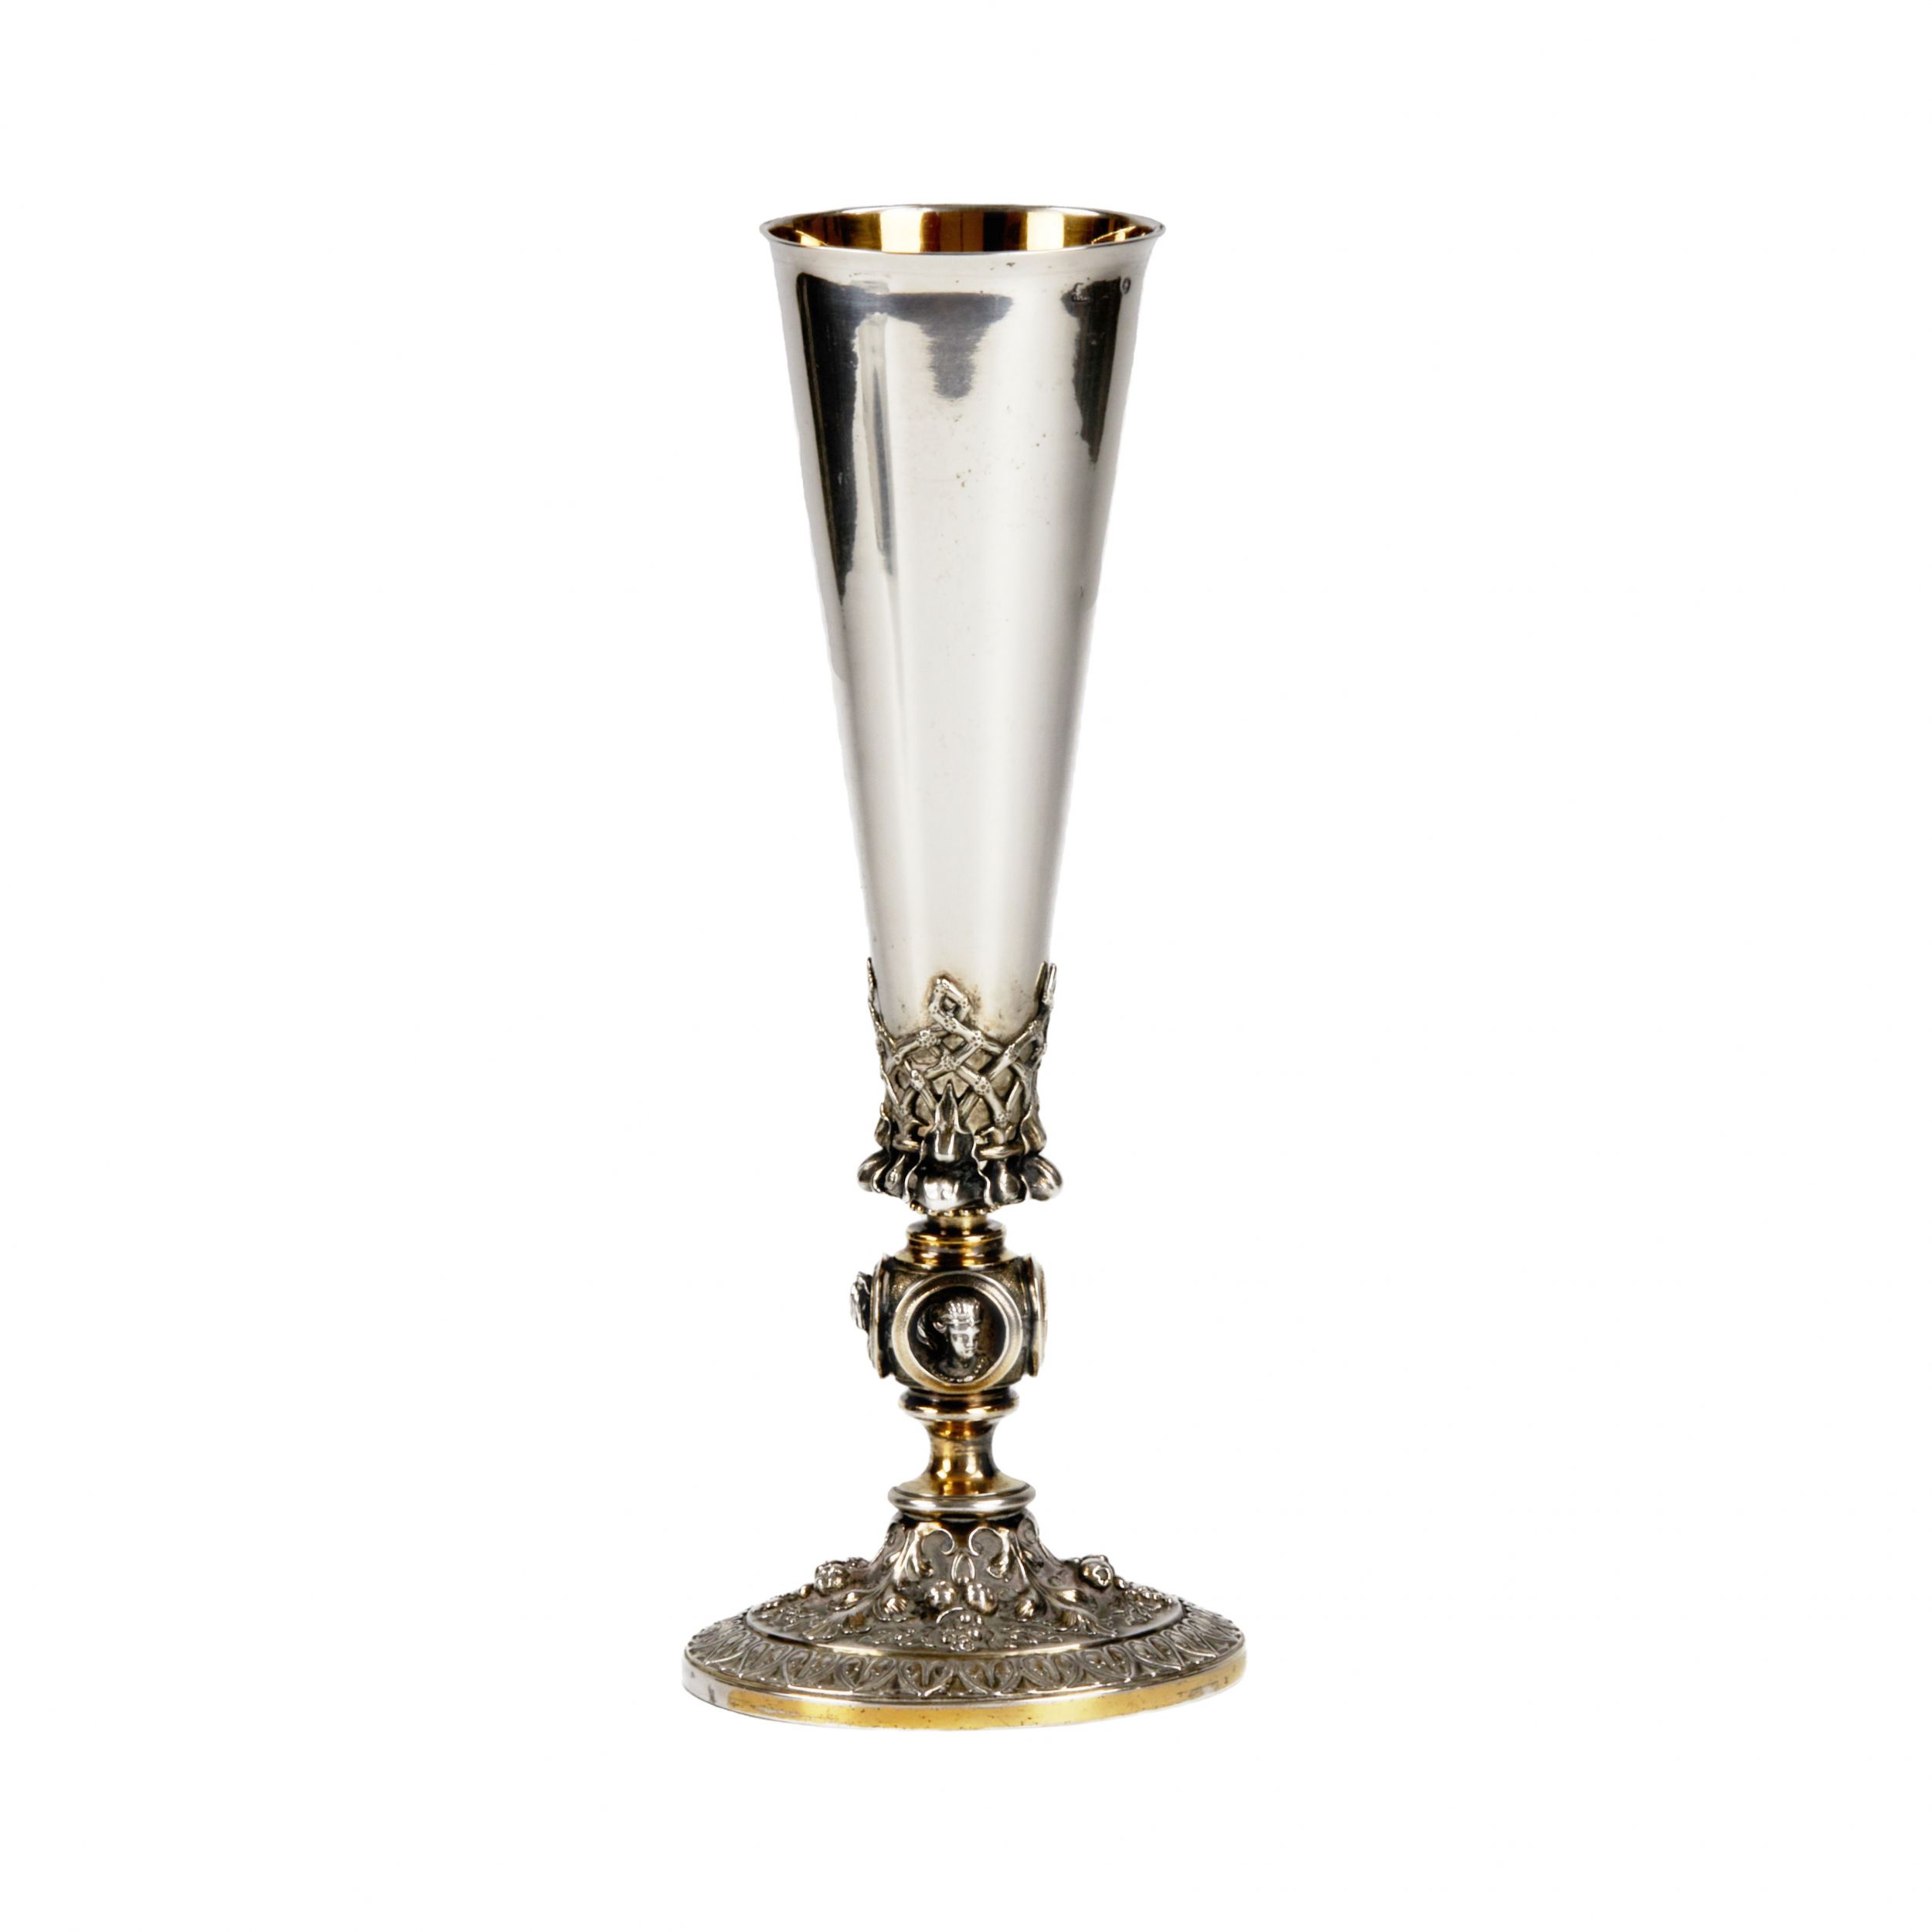 Gilded silver goblet. St. Petersburg, 84 samples, late 19th century. - Image 3 of 8